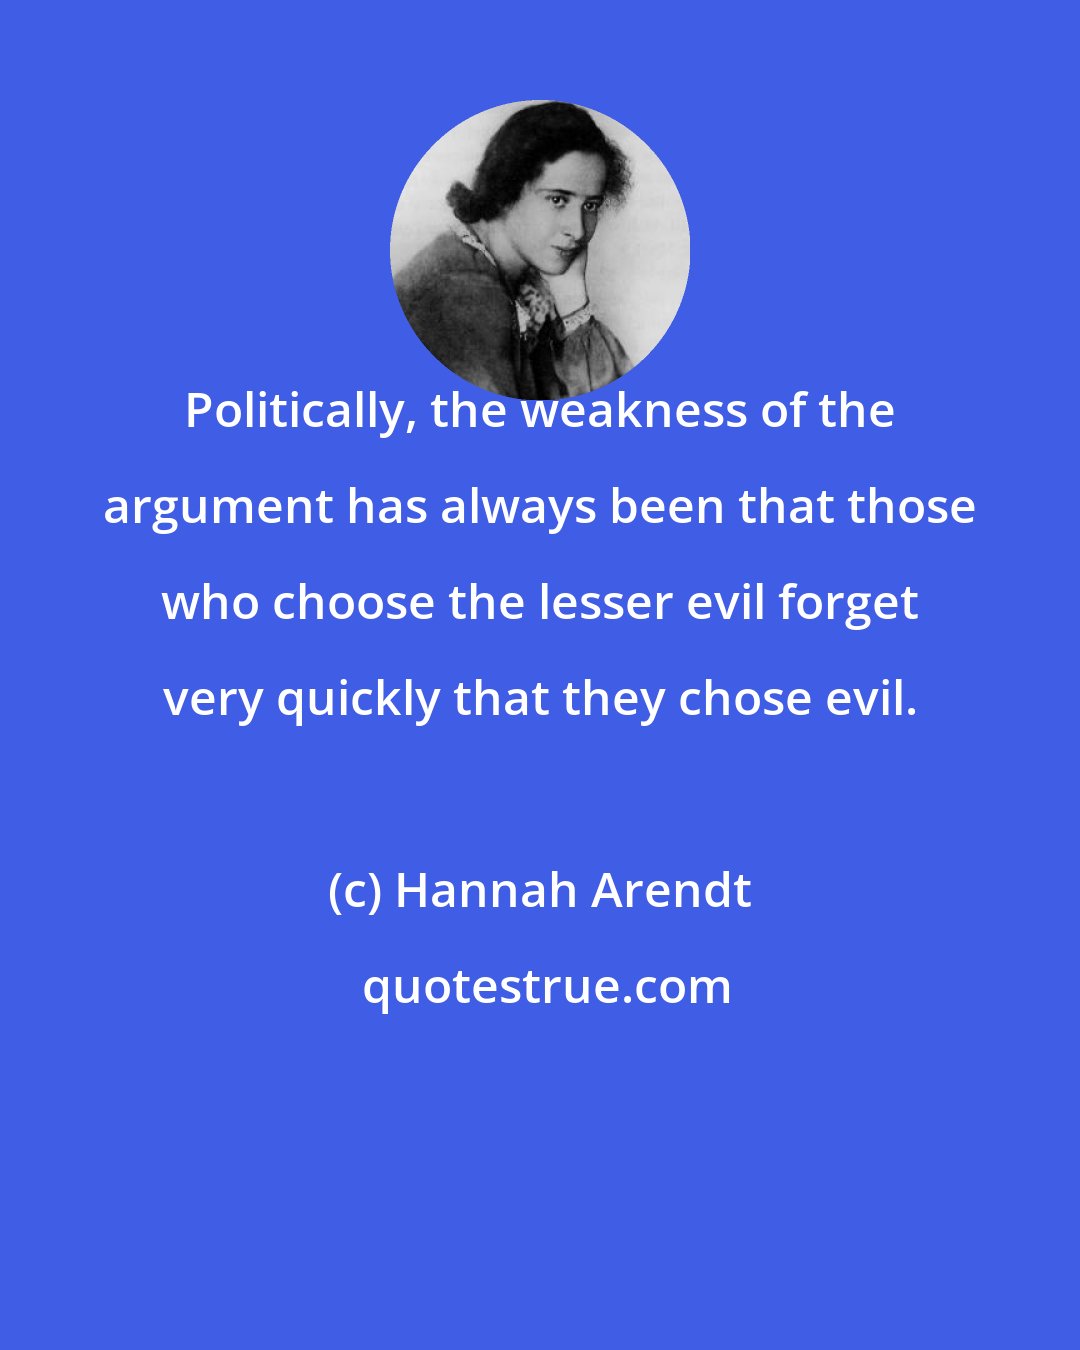 Hannah Arendt: Politically, the weakness of the argument has always been that those who choose the lesser evil forget very quickly that they chose evil.